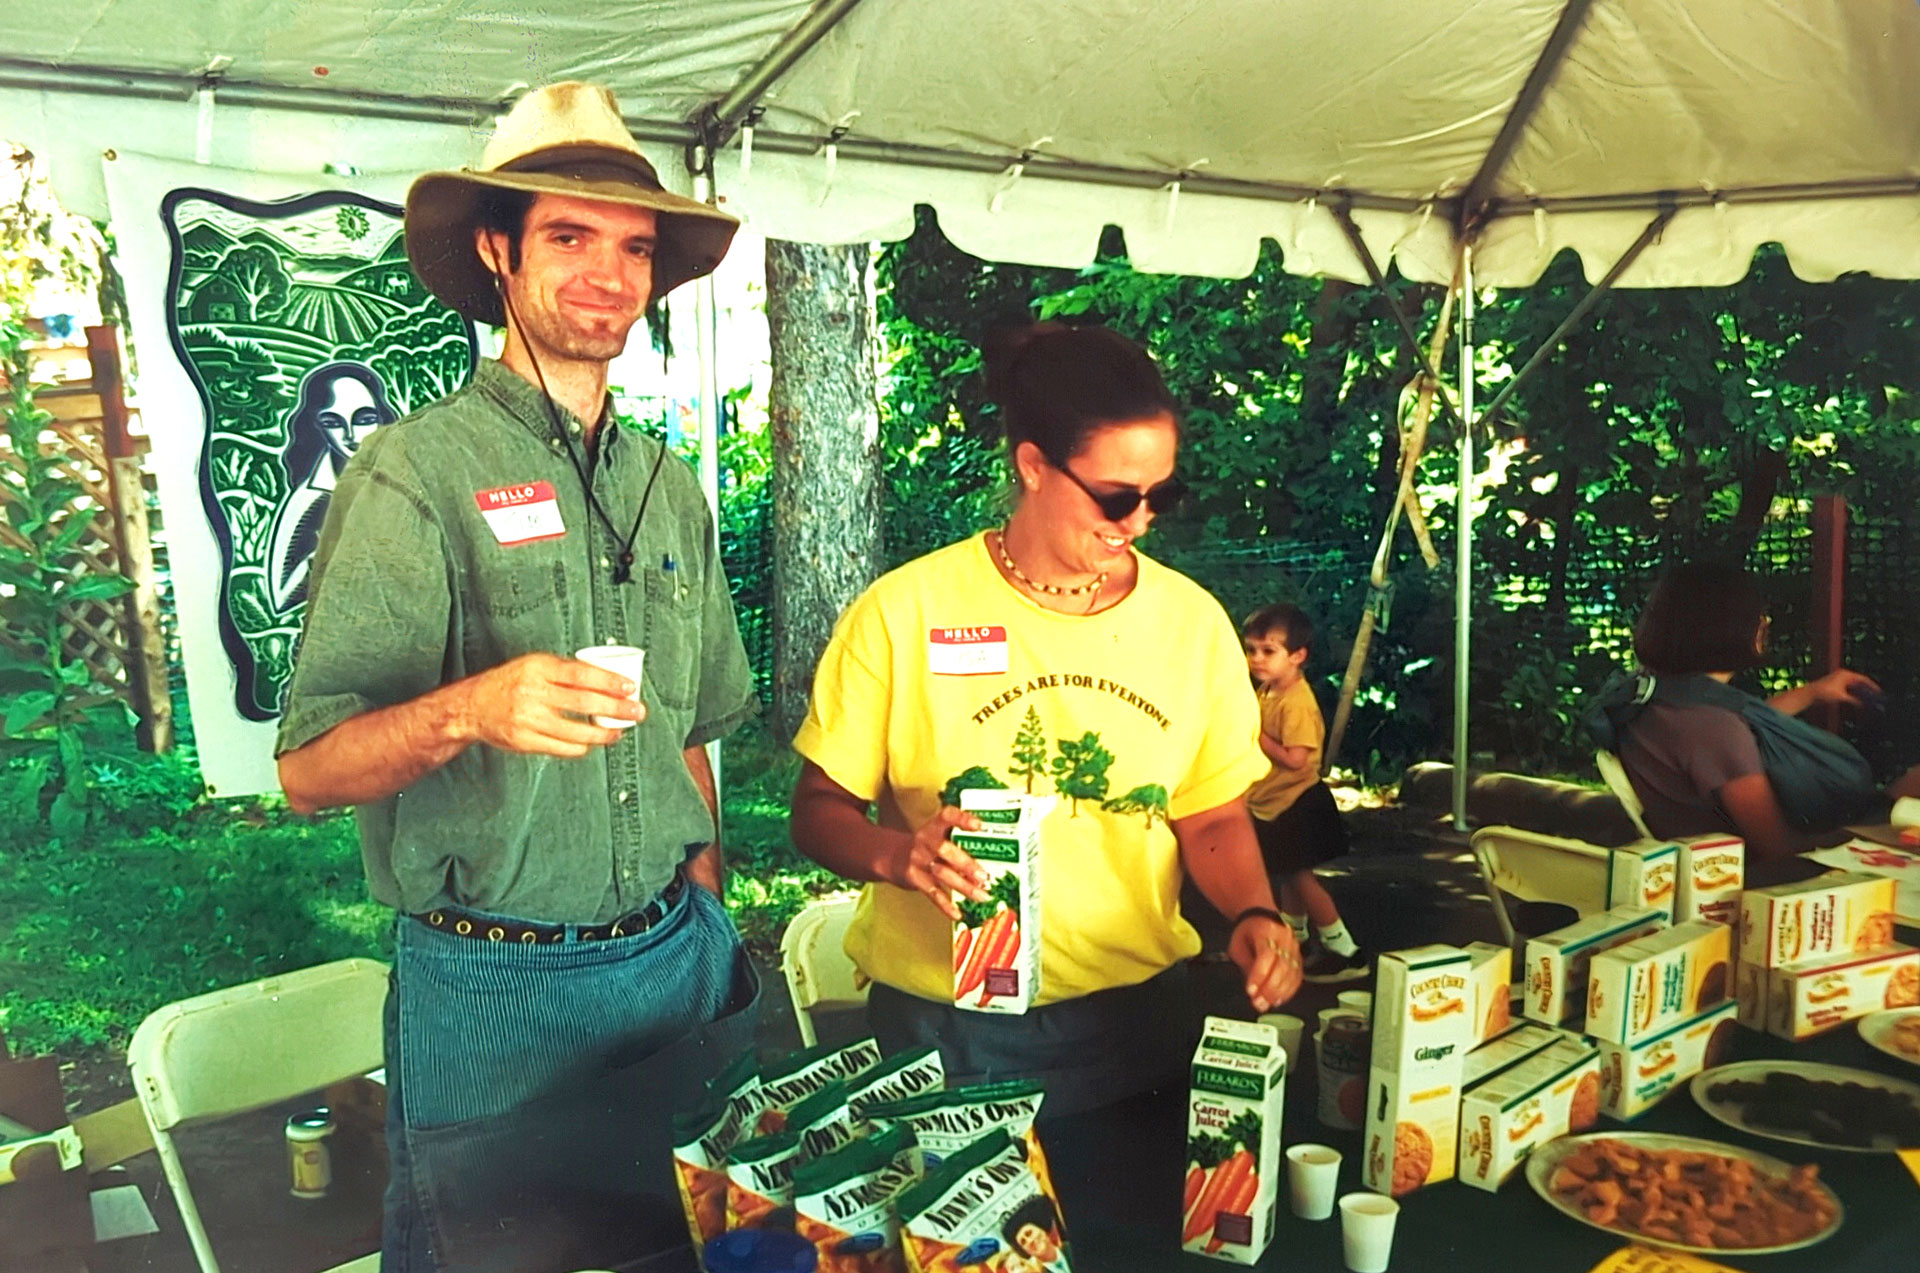 A man and a woman stand under a canopy at an outdoor Whole Foods Coop event in Duluth, MN, each wearing name tags and handling containers of organic cereal. The man has a wide-brimmed hat and a cup in hand, the woman wears a yellow shirt with a graphic, and a child is in the background.